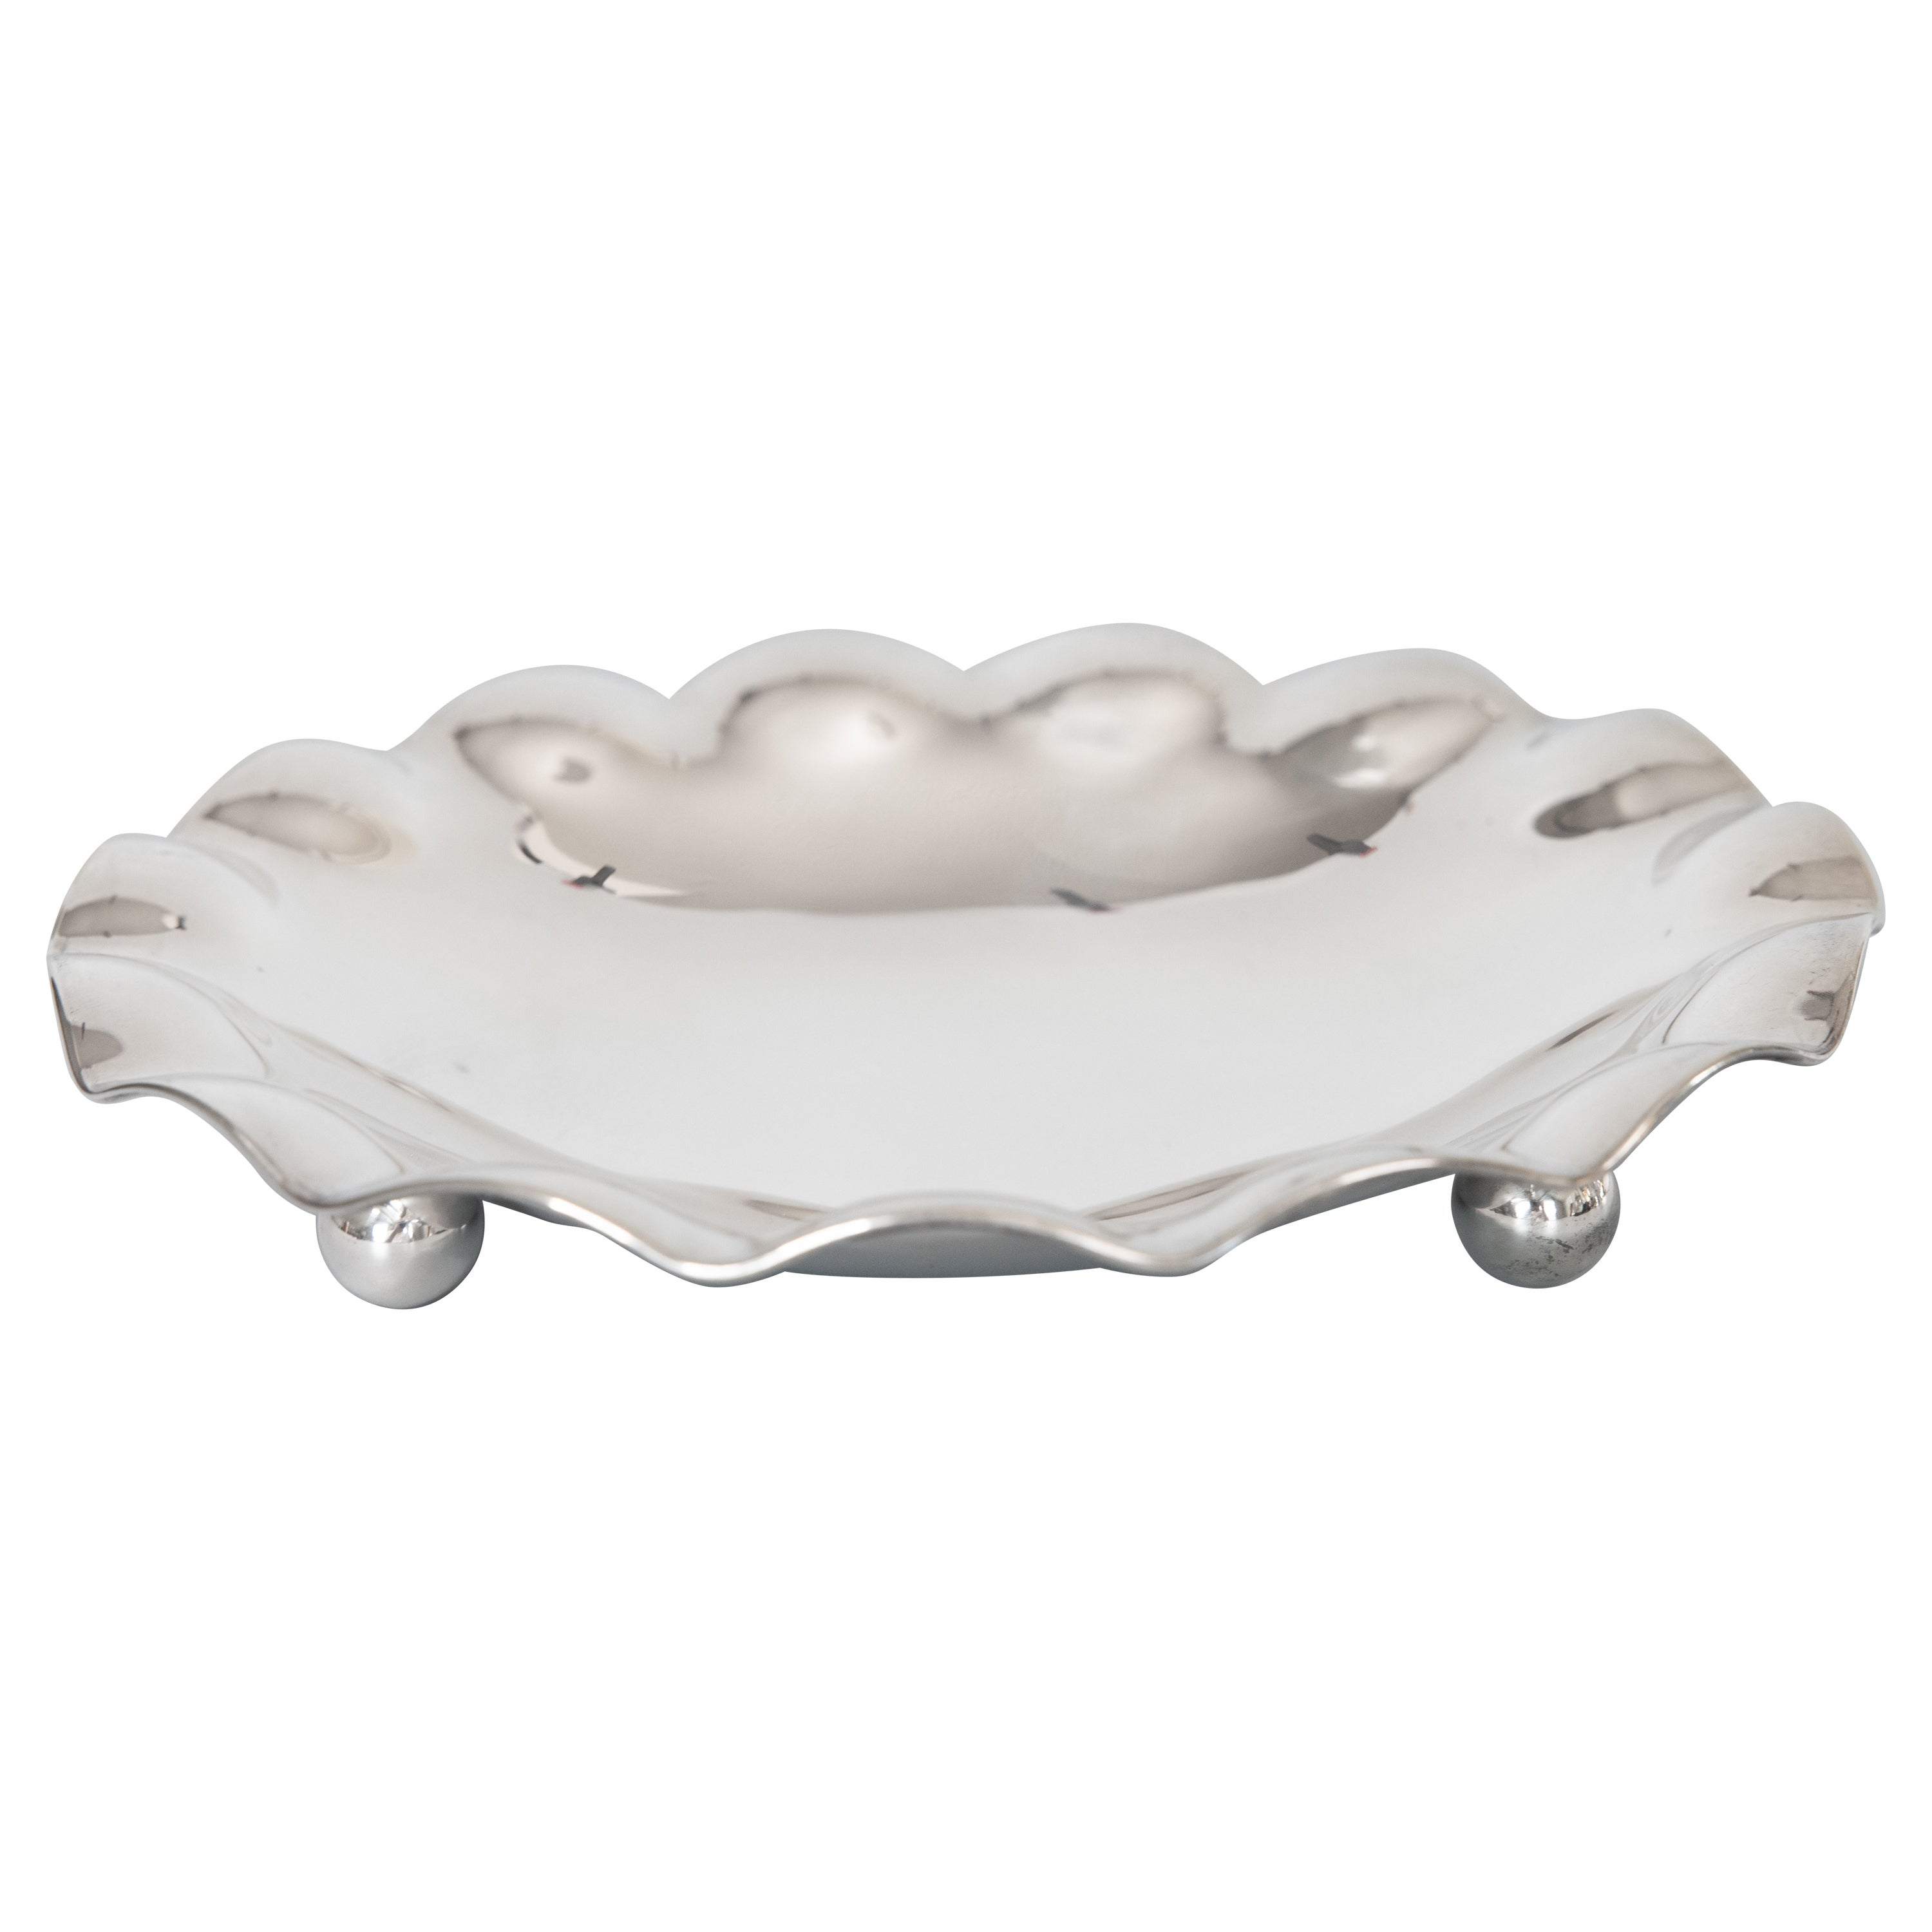 Mid-20th Century Italian Silver Plate Footed Scalloped Tray or Shallow Bowl